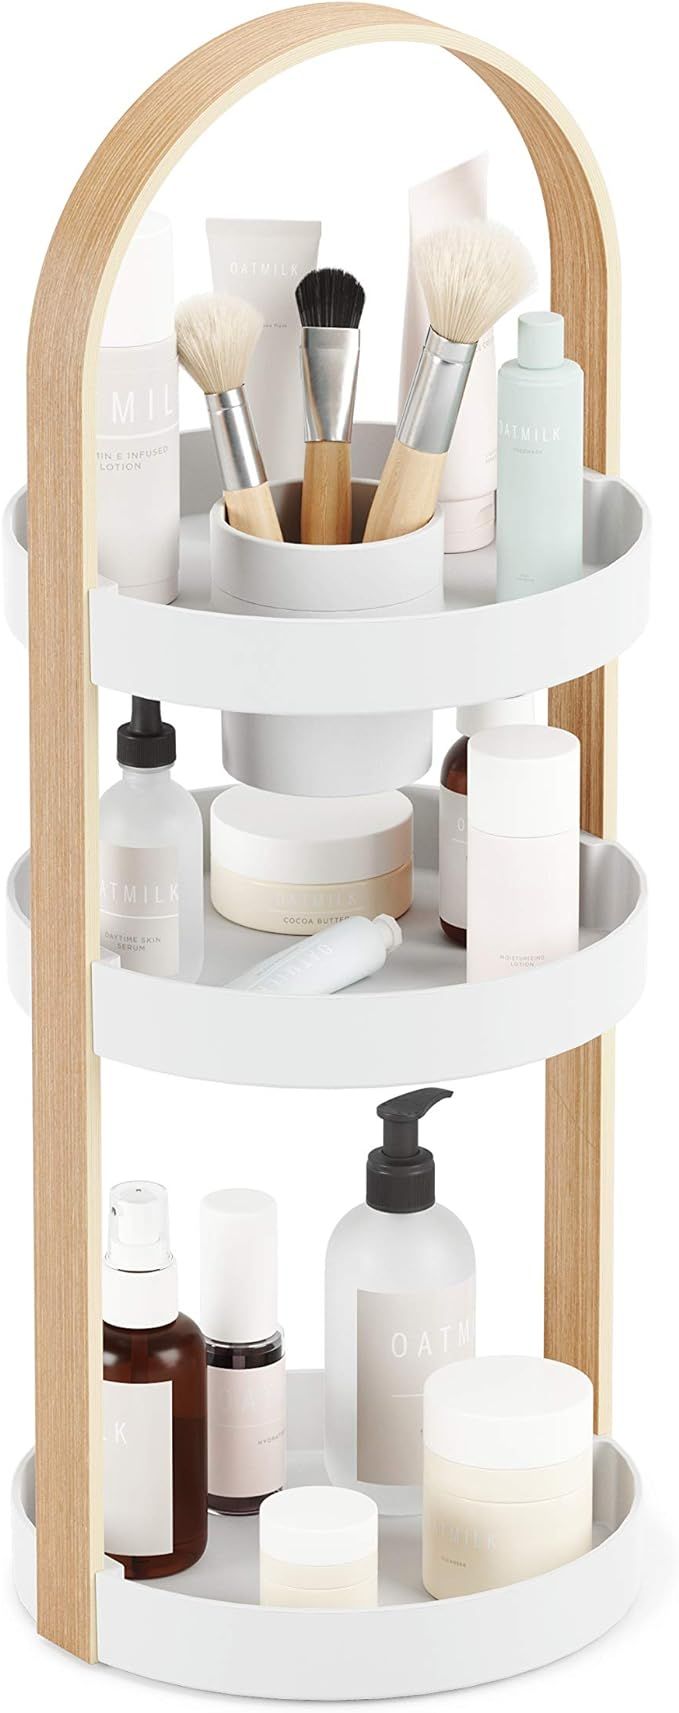 Umbra Bellwood Cosmetic Organizer, W20×D20×H50cm, White/Natural | Amazon (US)